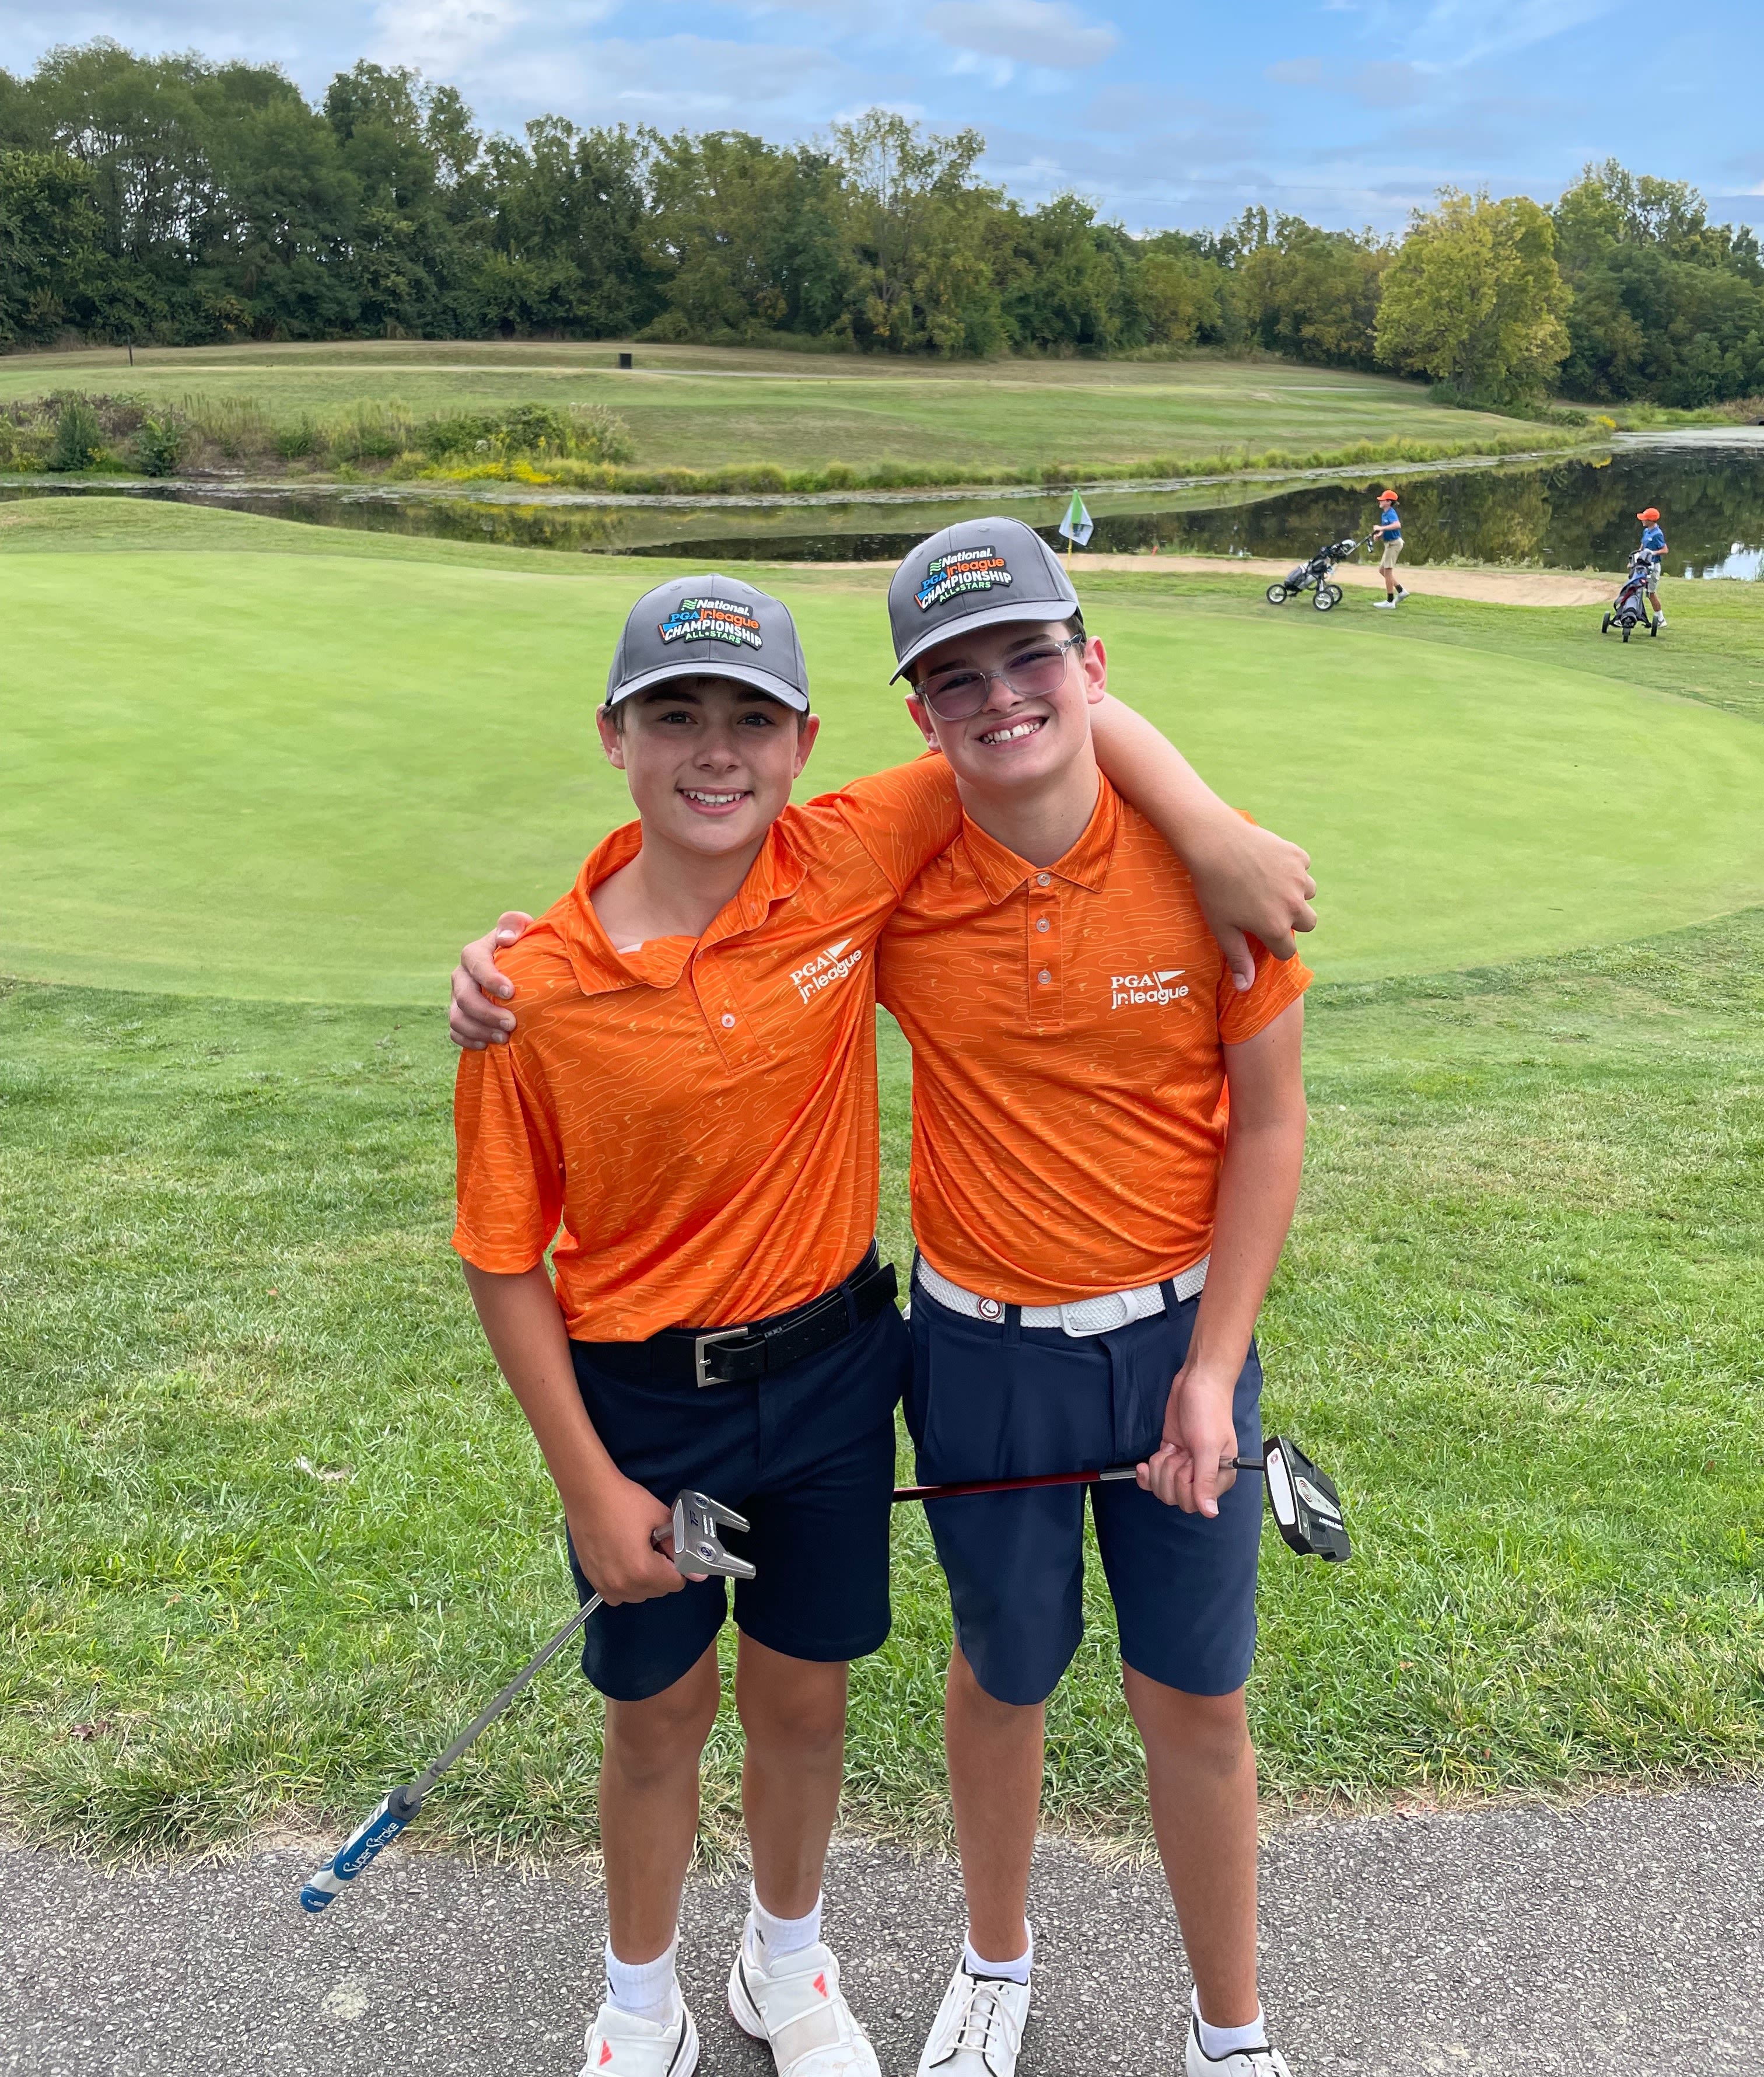 Peters (right) with a teammate during a PGA Jr. League match.